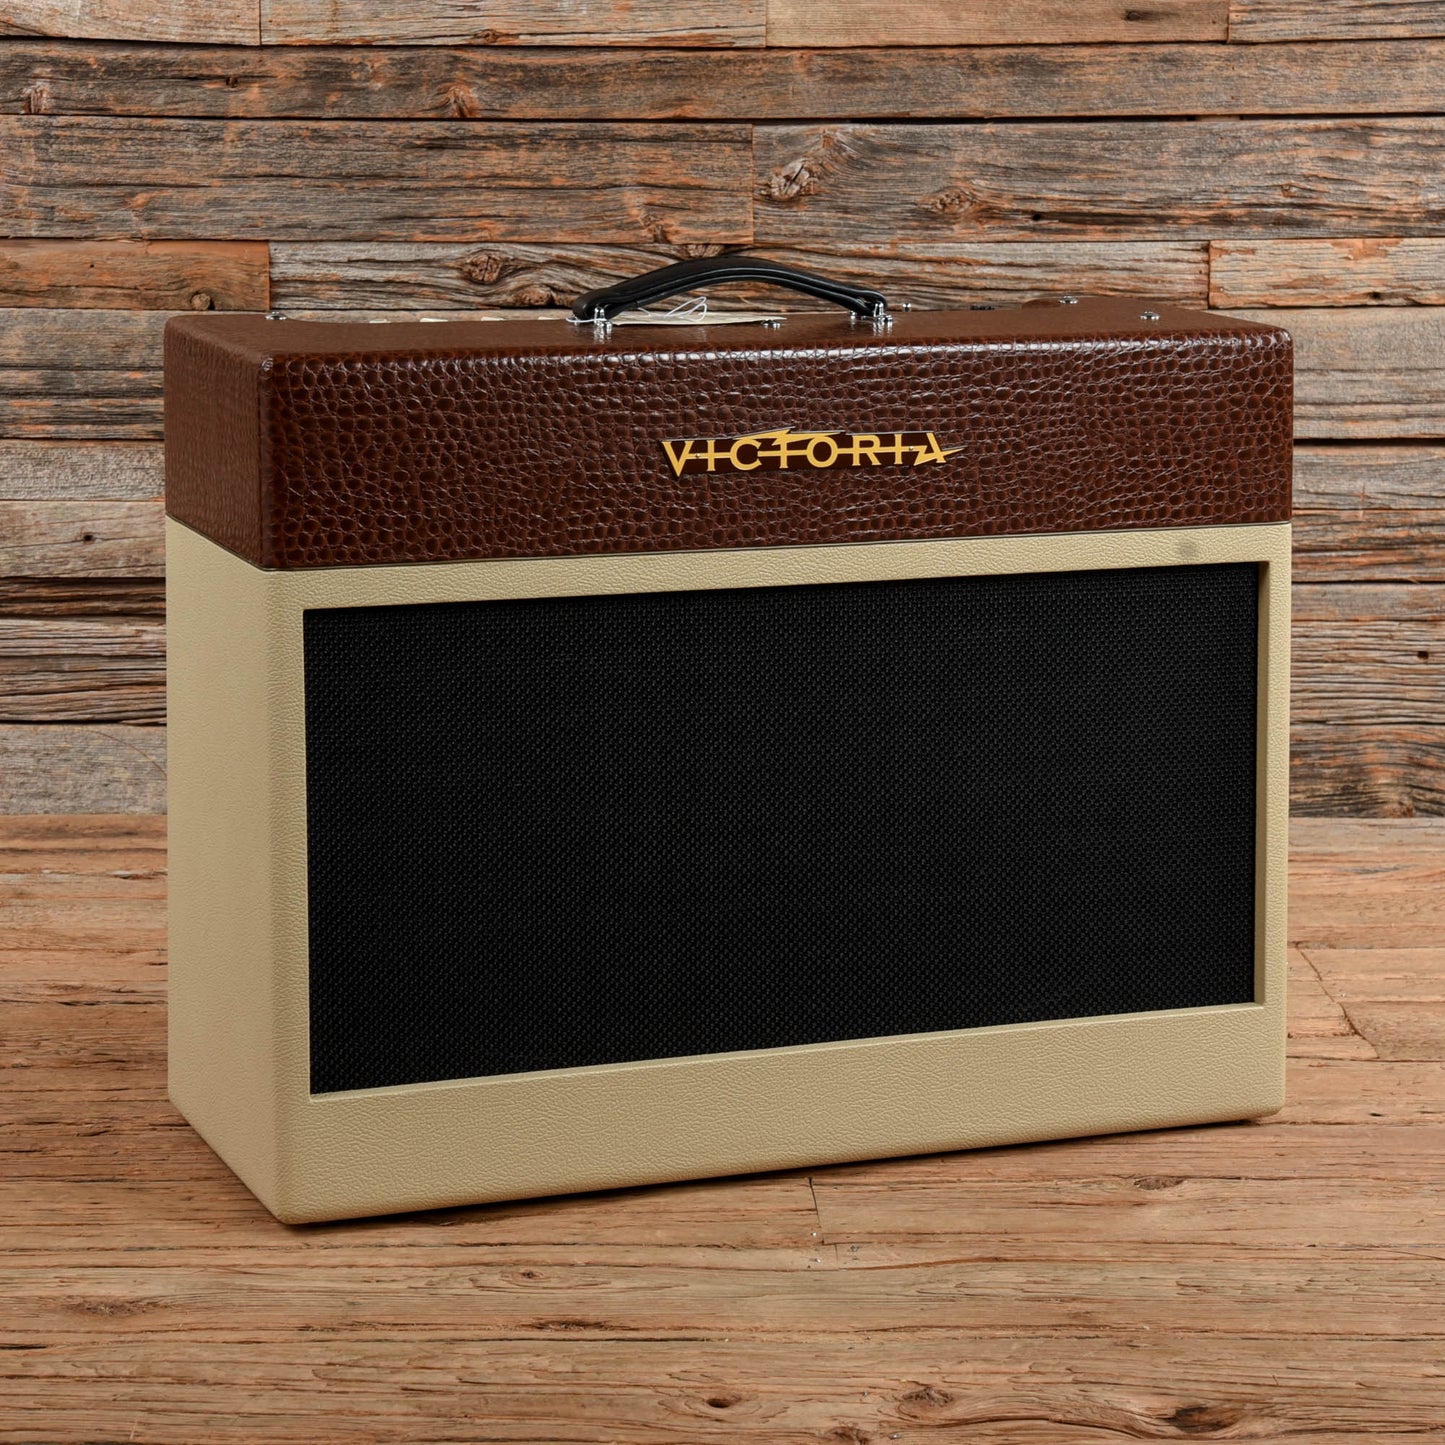 Victoria Golden Melody 2x12 Combo Amps / Guitar Cabinets